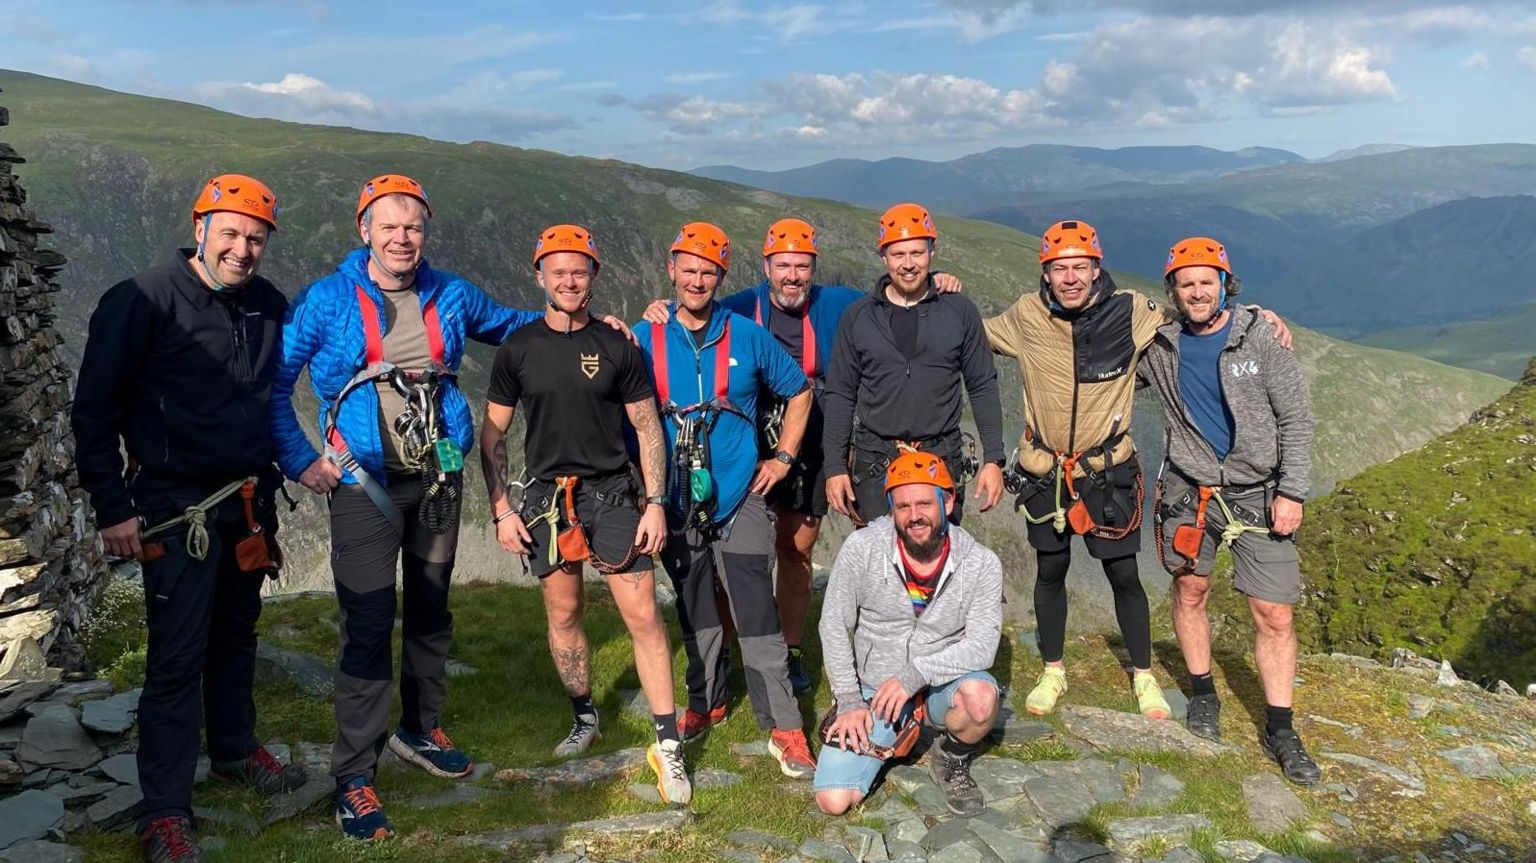 Nathan and a group posing after completing the via ferrata at Honsiter Slate Mine